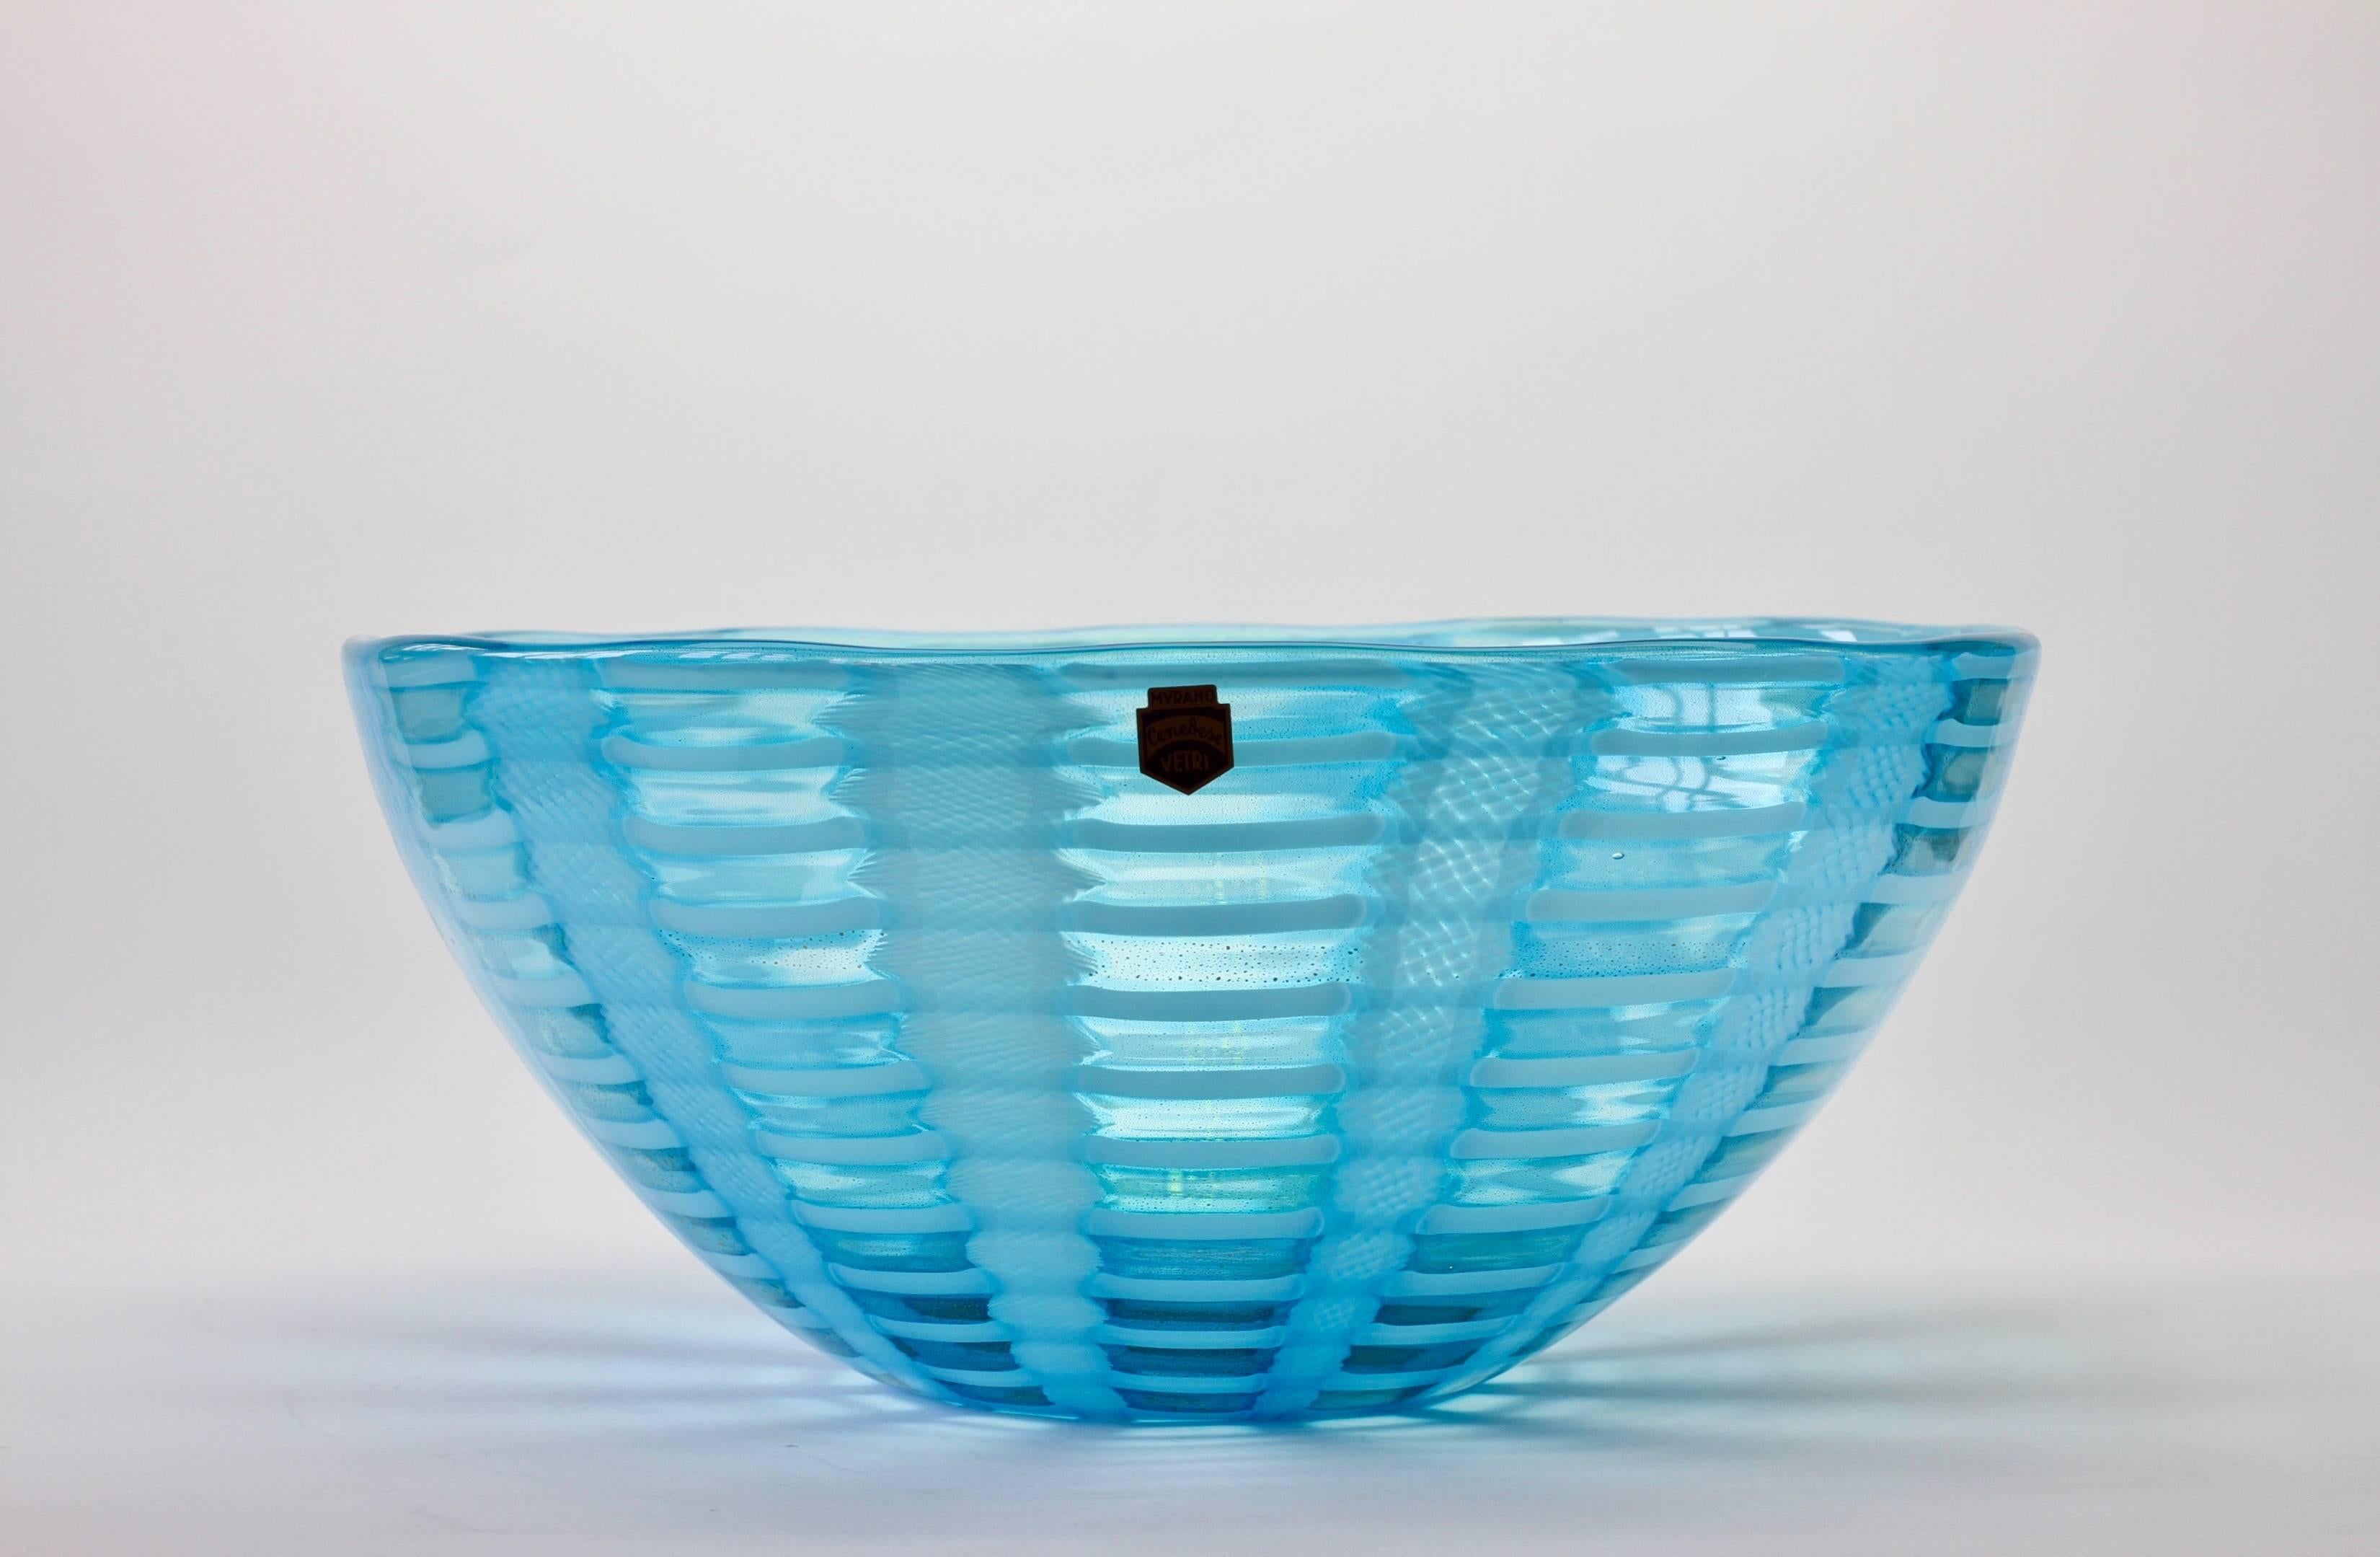 Signed Cenedese art glass bowl part of a limited edition called ‘Tessuti’, made in the early 2000s. This is a magical piece of Murano glass - measuring a large 30cms / 12 inches in diameter and displaying some exquisite Italian glass techniques.